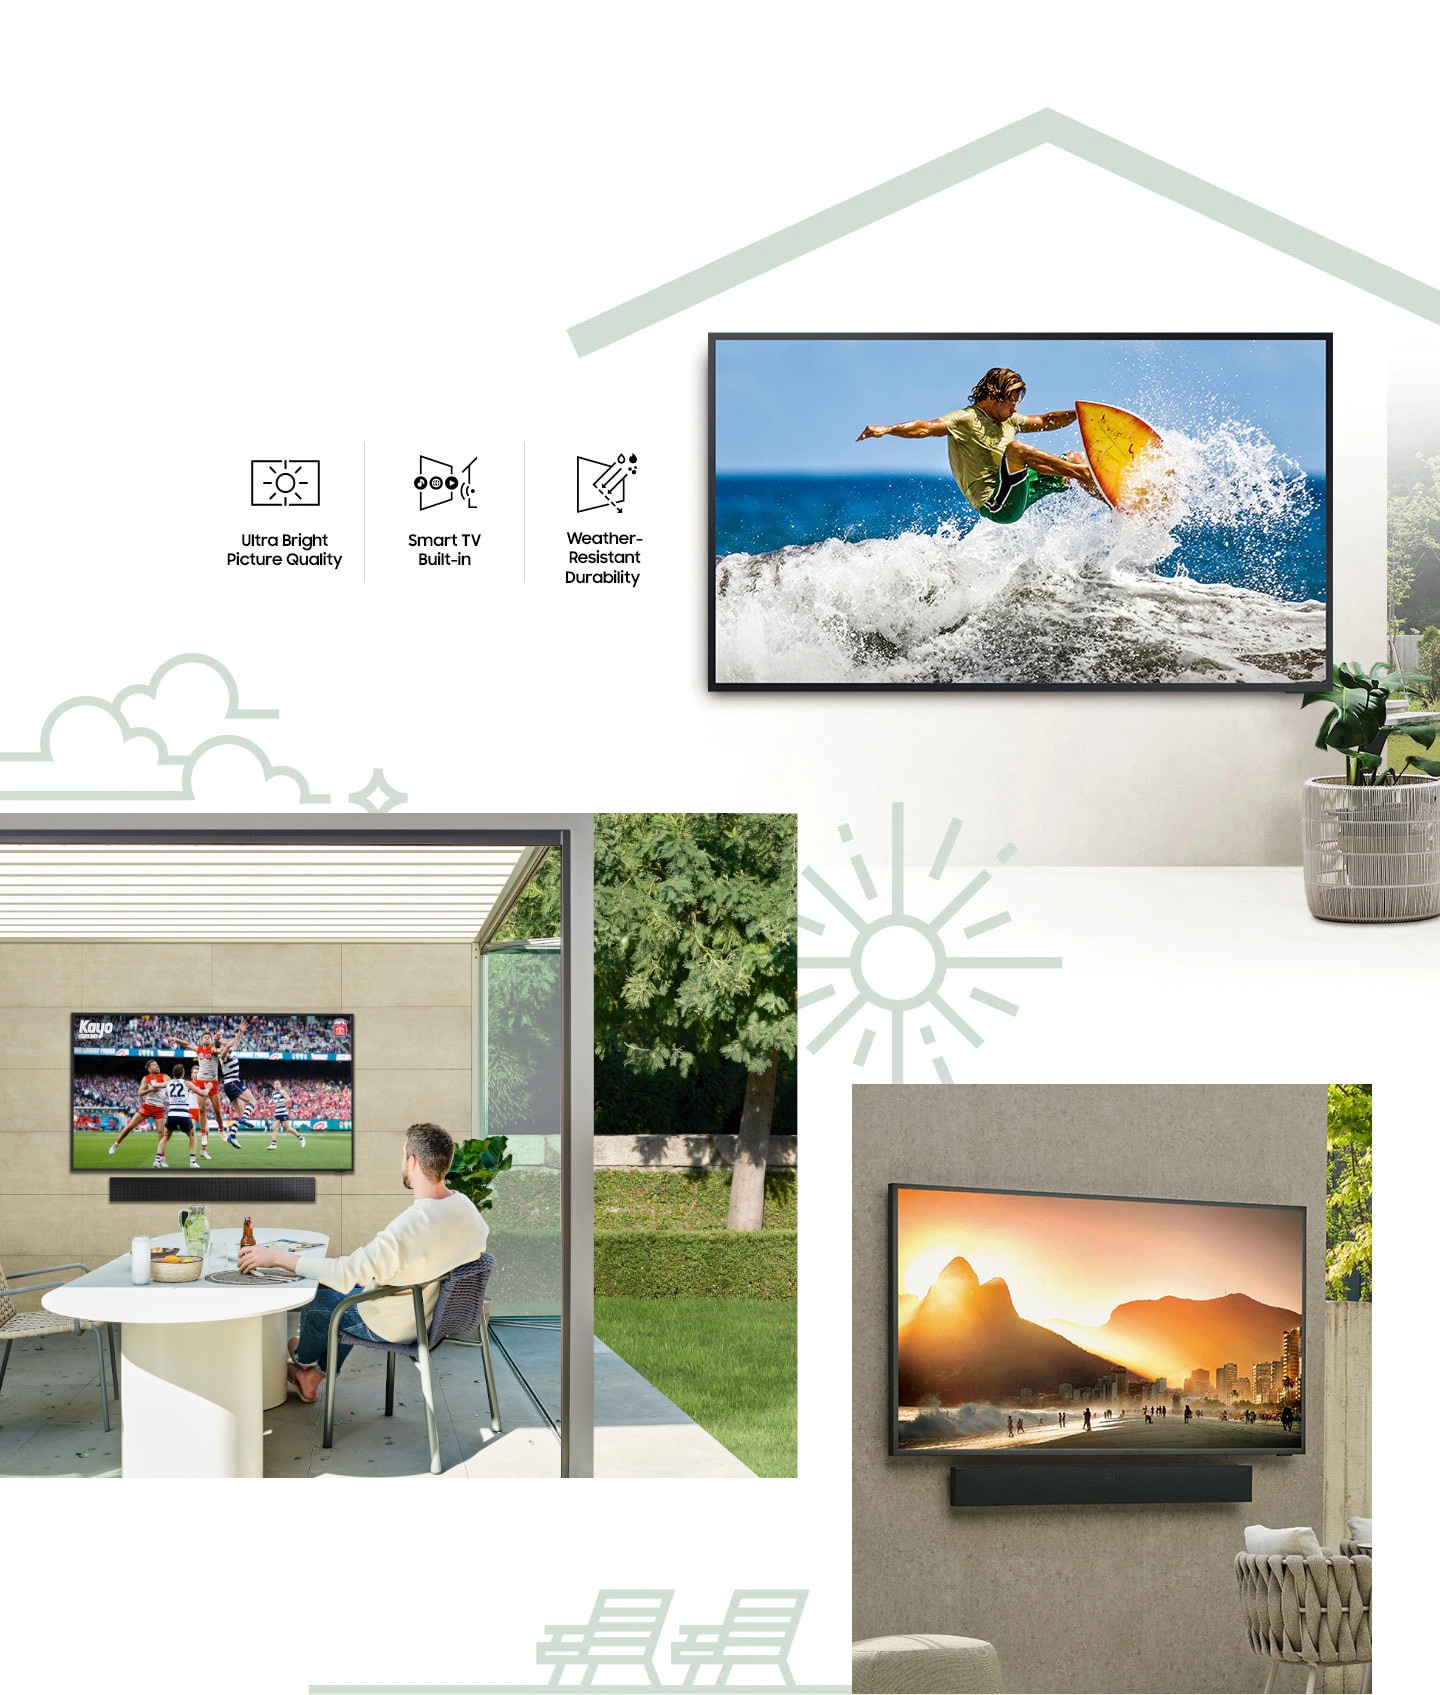 The Terrace is installed on a wall at an outdoor area. The Terrace's Top 4 feature are introduced as Direct-sun Protection, Ultra Bright Picture Quality, Smart TV built-in and Weather-Resistant Durability. The Terrace installed on the wall and 2 people are watching a sports game outdoors. The Terrace is installed on a wall outdoors.